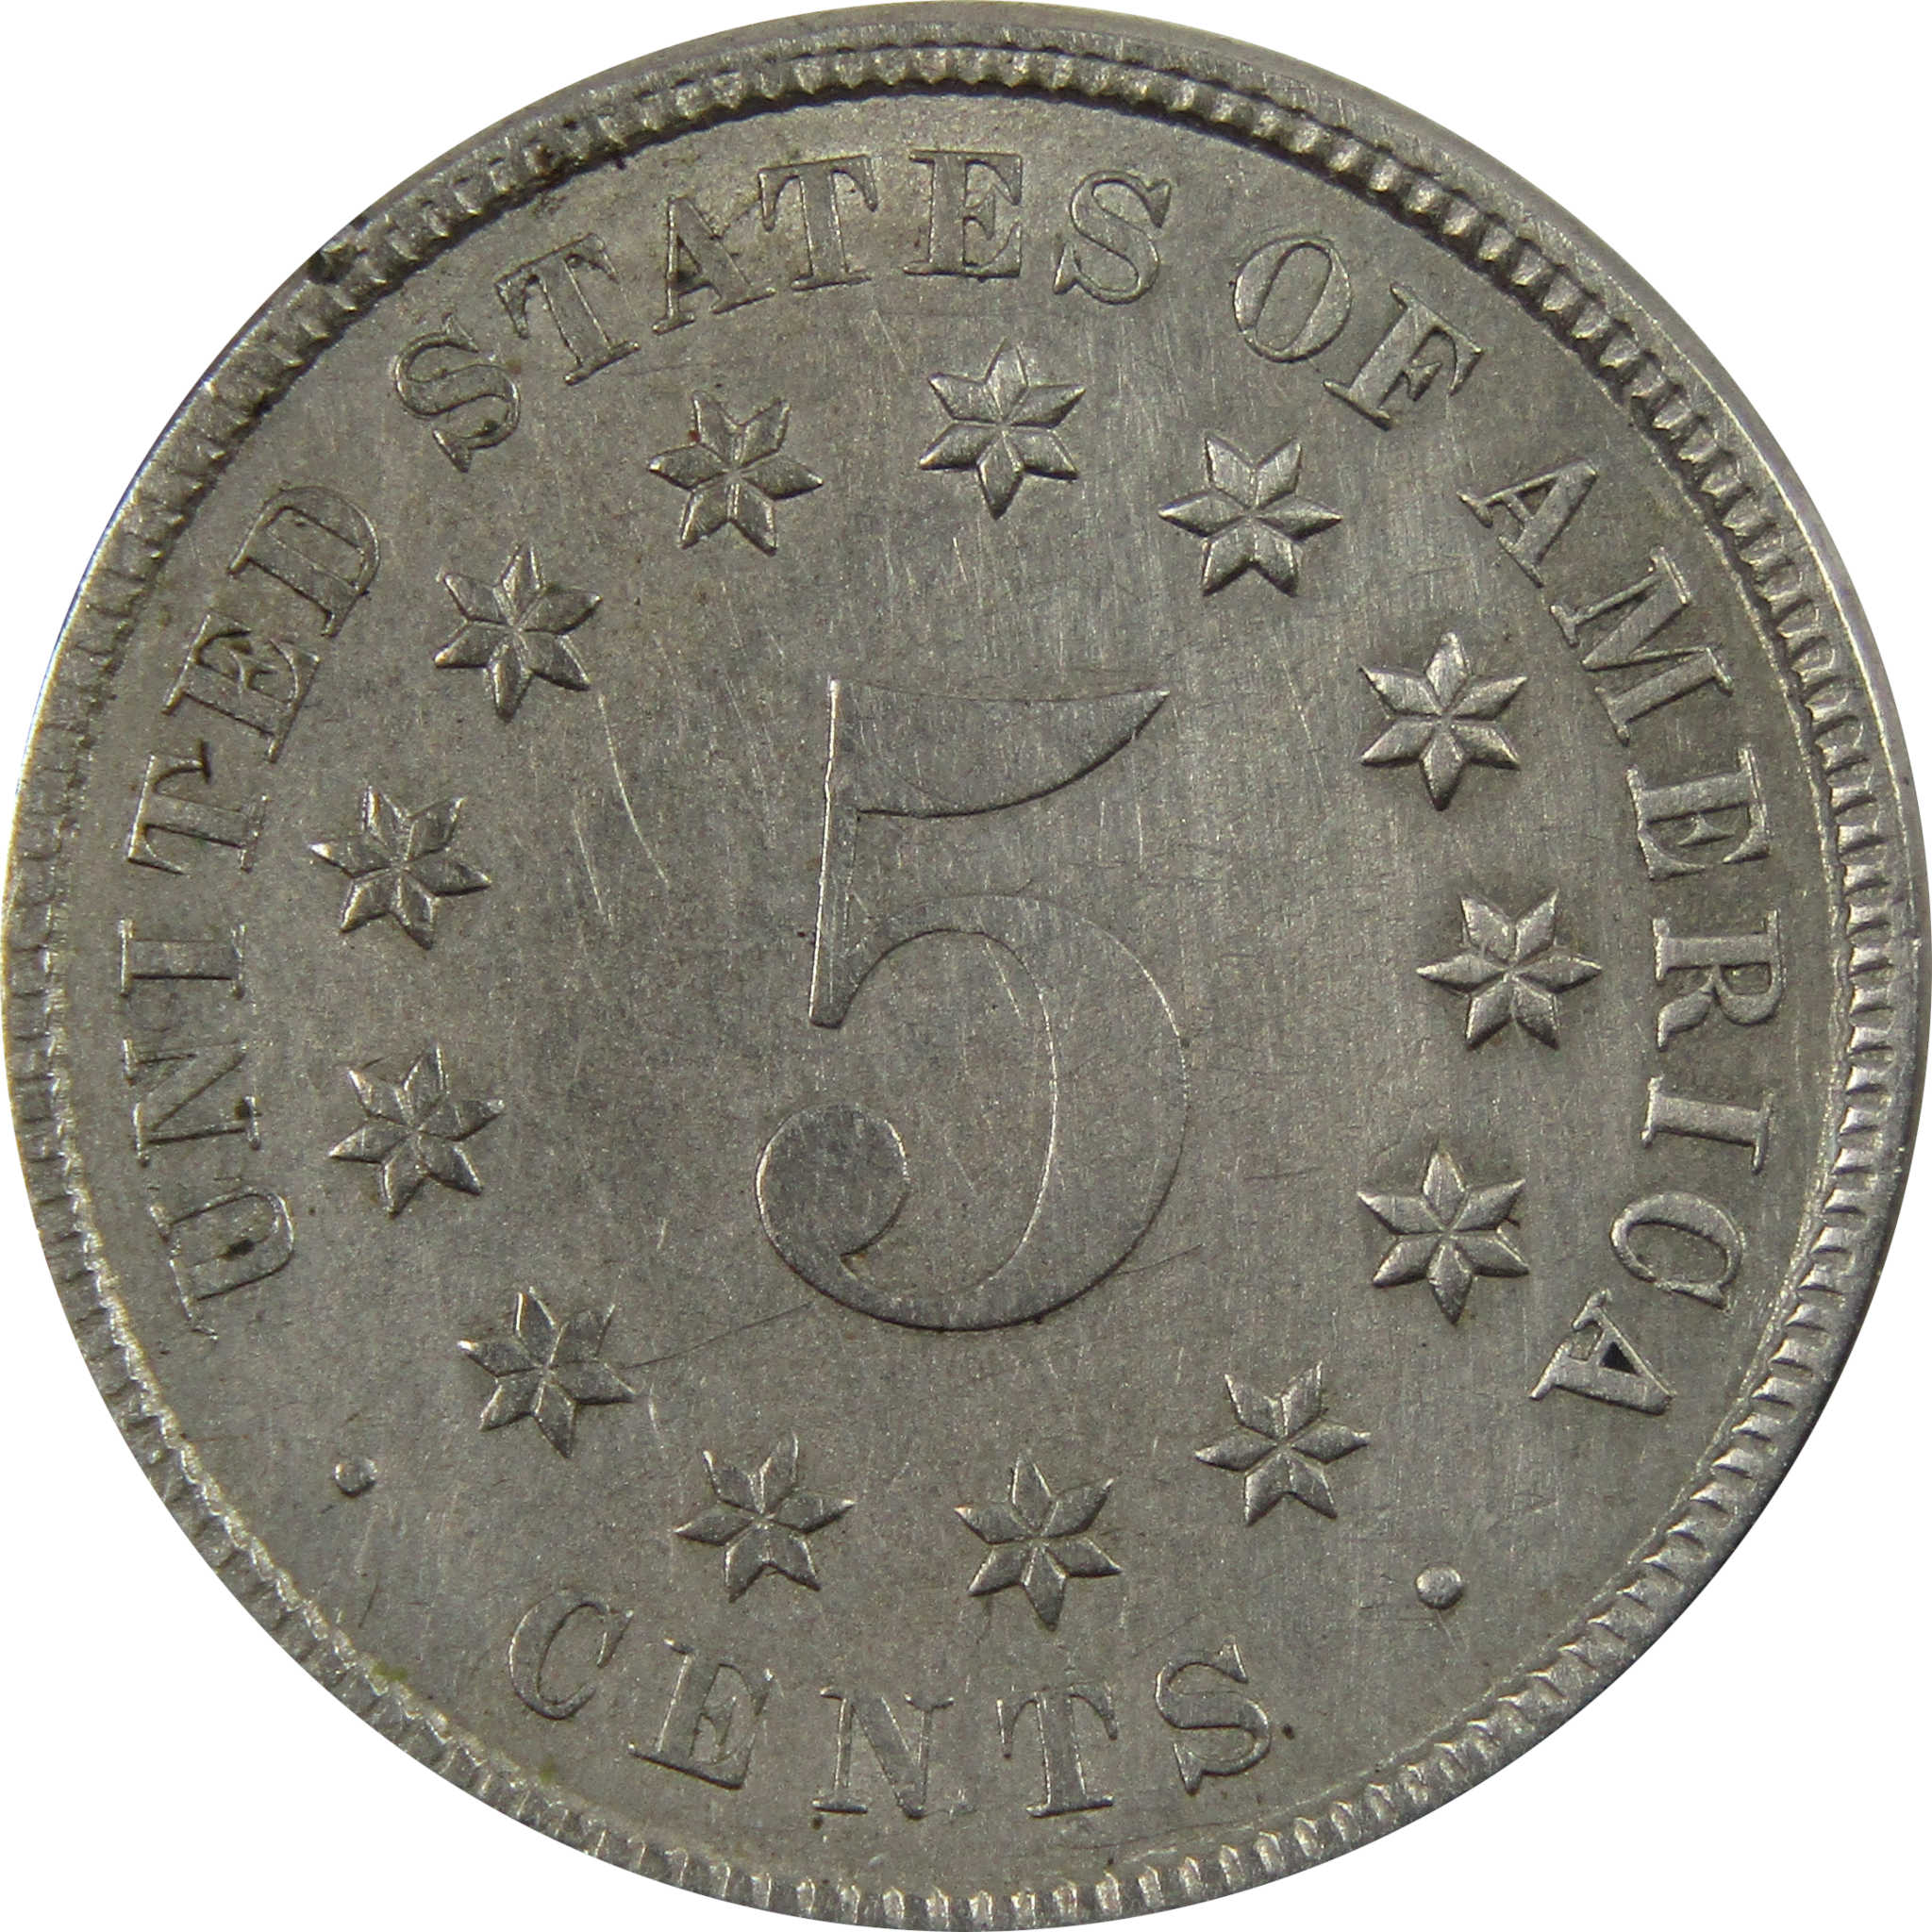 1882 Shield Nickel XF EF Extremely Fine 5c Coin SKU:I4966